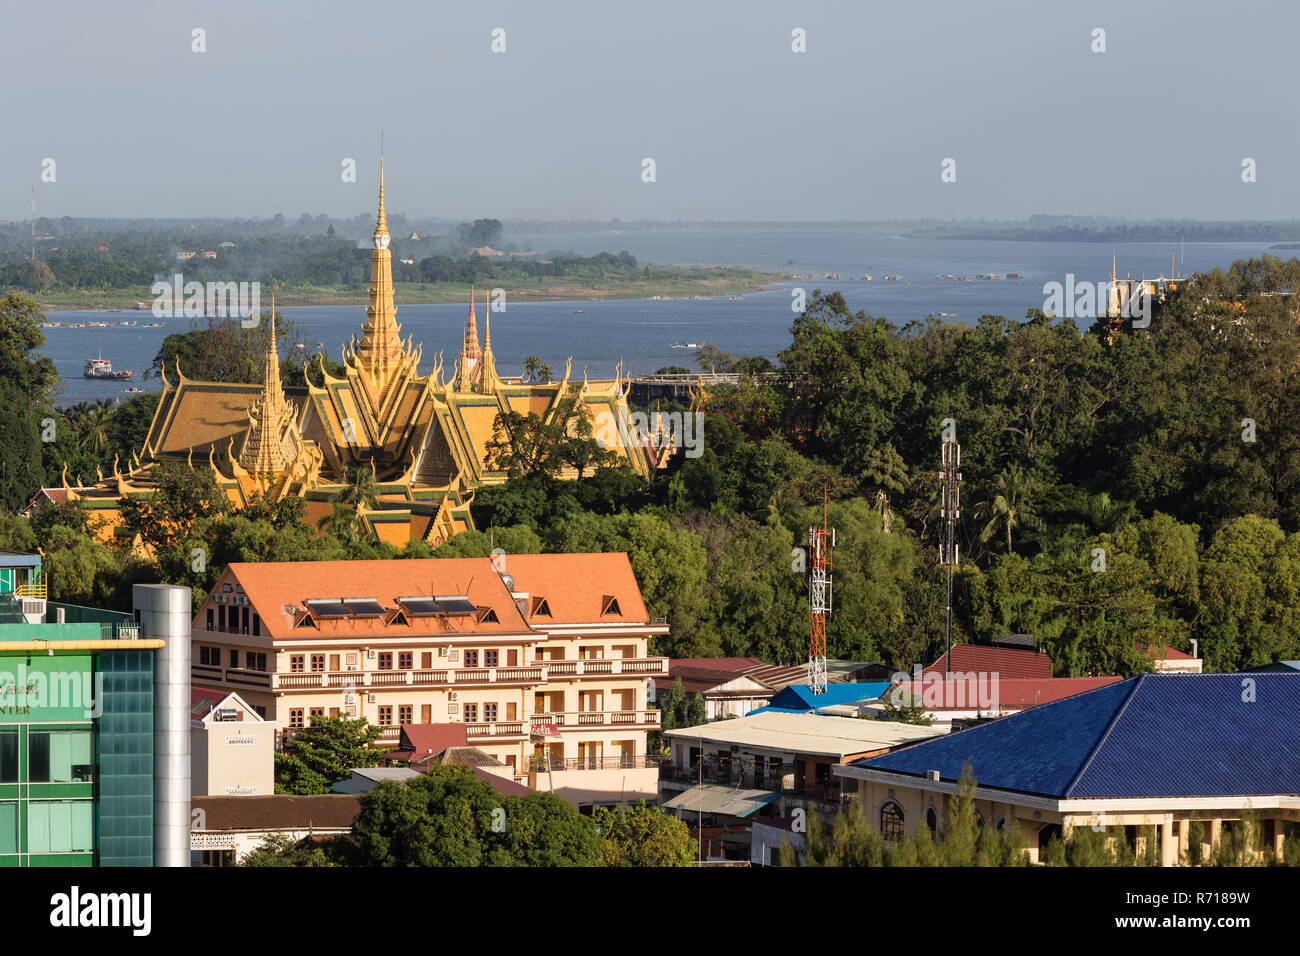 View on the Royal Palace, the Tonle Sap River and the Mekong, cityscape, Phnom Penh, Cambodia Stock Photo